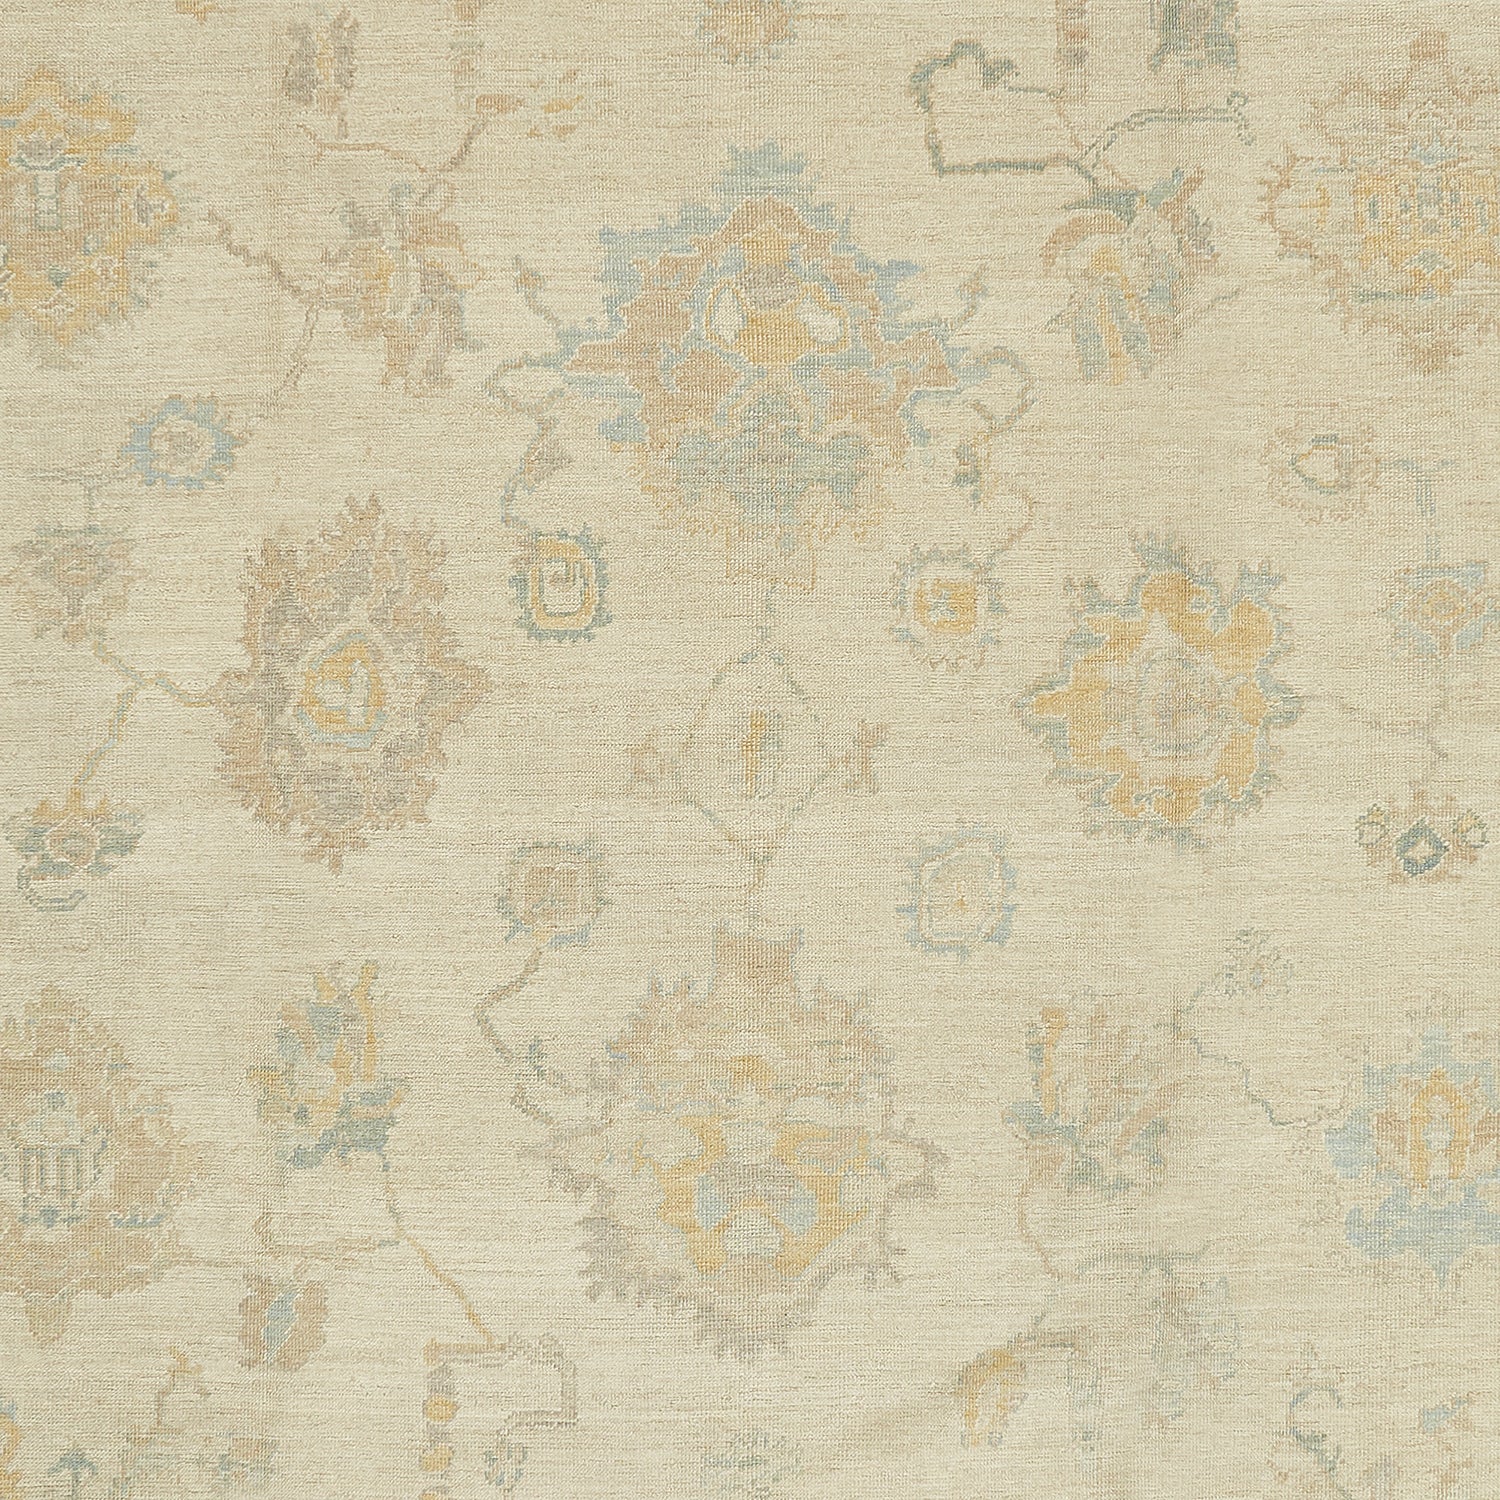 Traditional rug with intricate design in muted beige and blue.